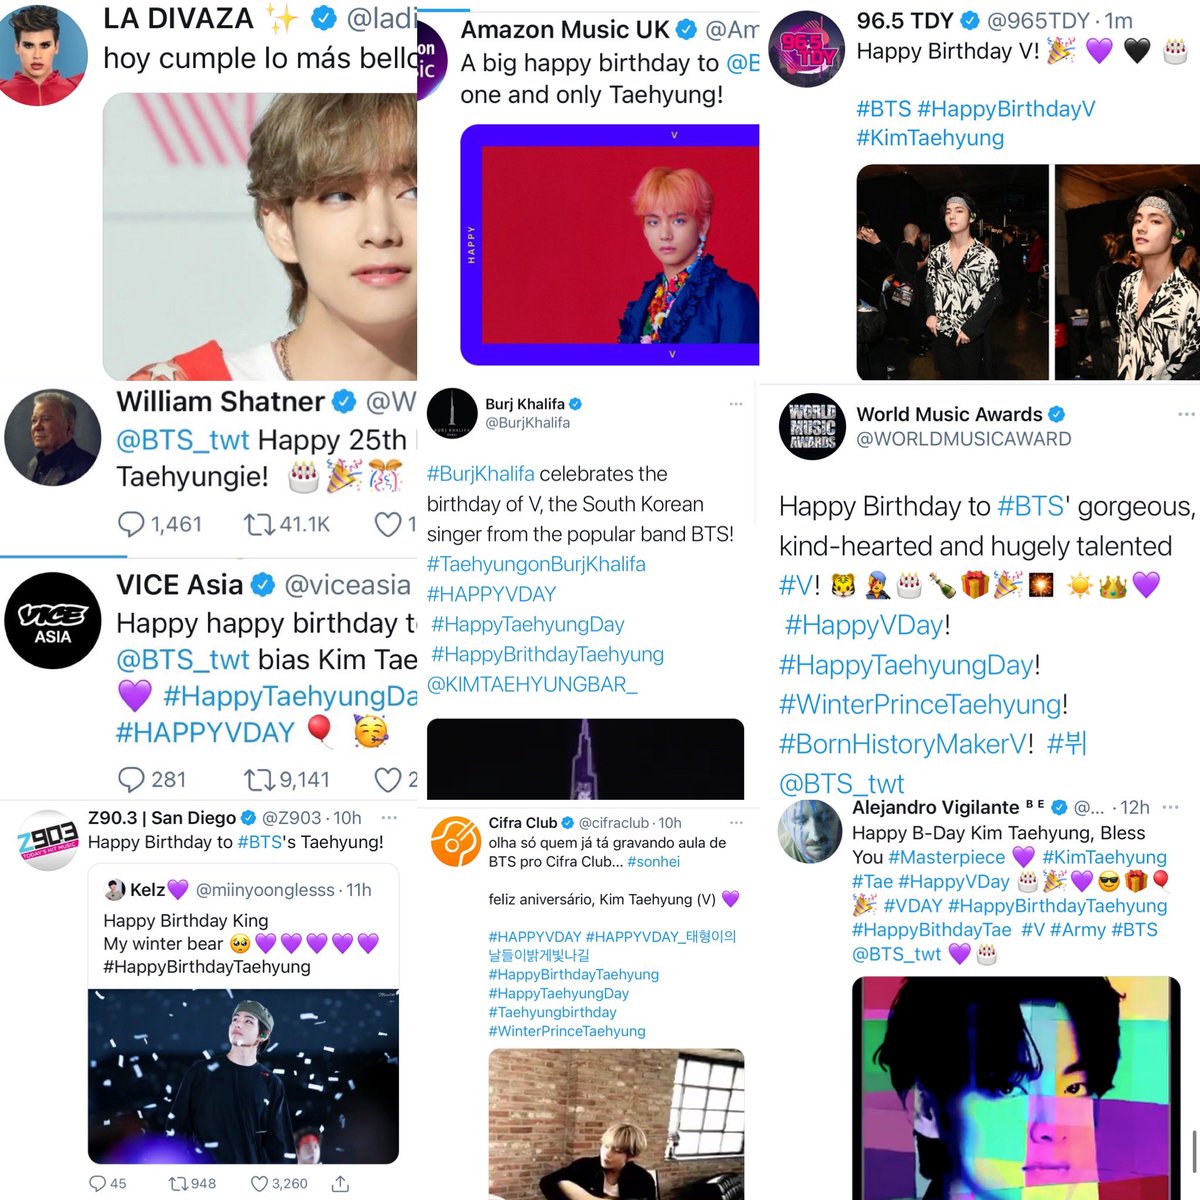 World 🌎 was talking about Taehyung #HappyTaehyungday @BTS_twt